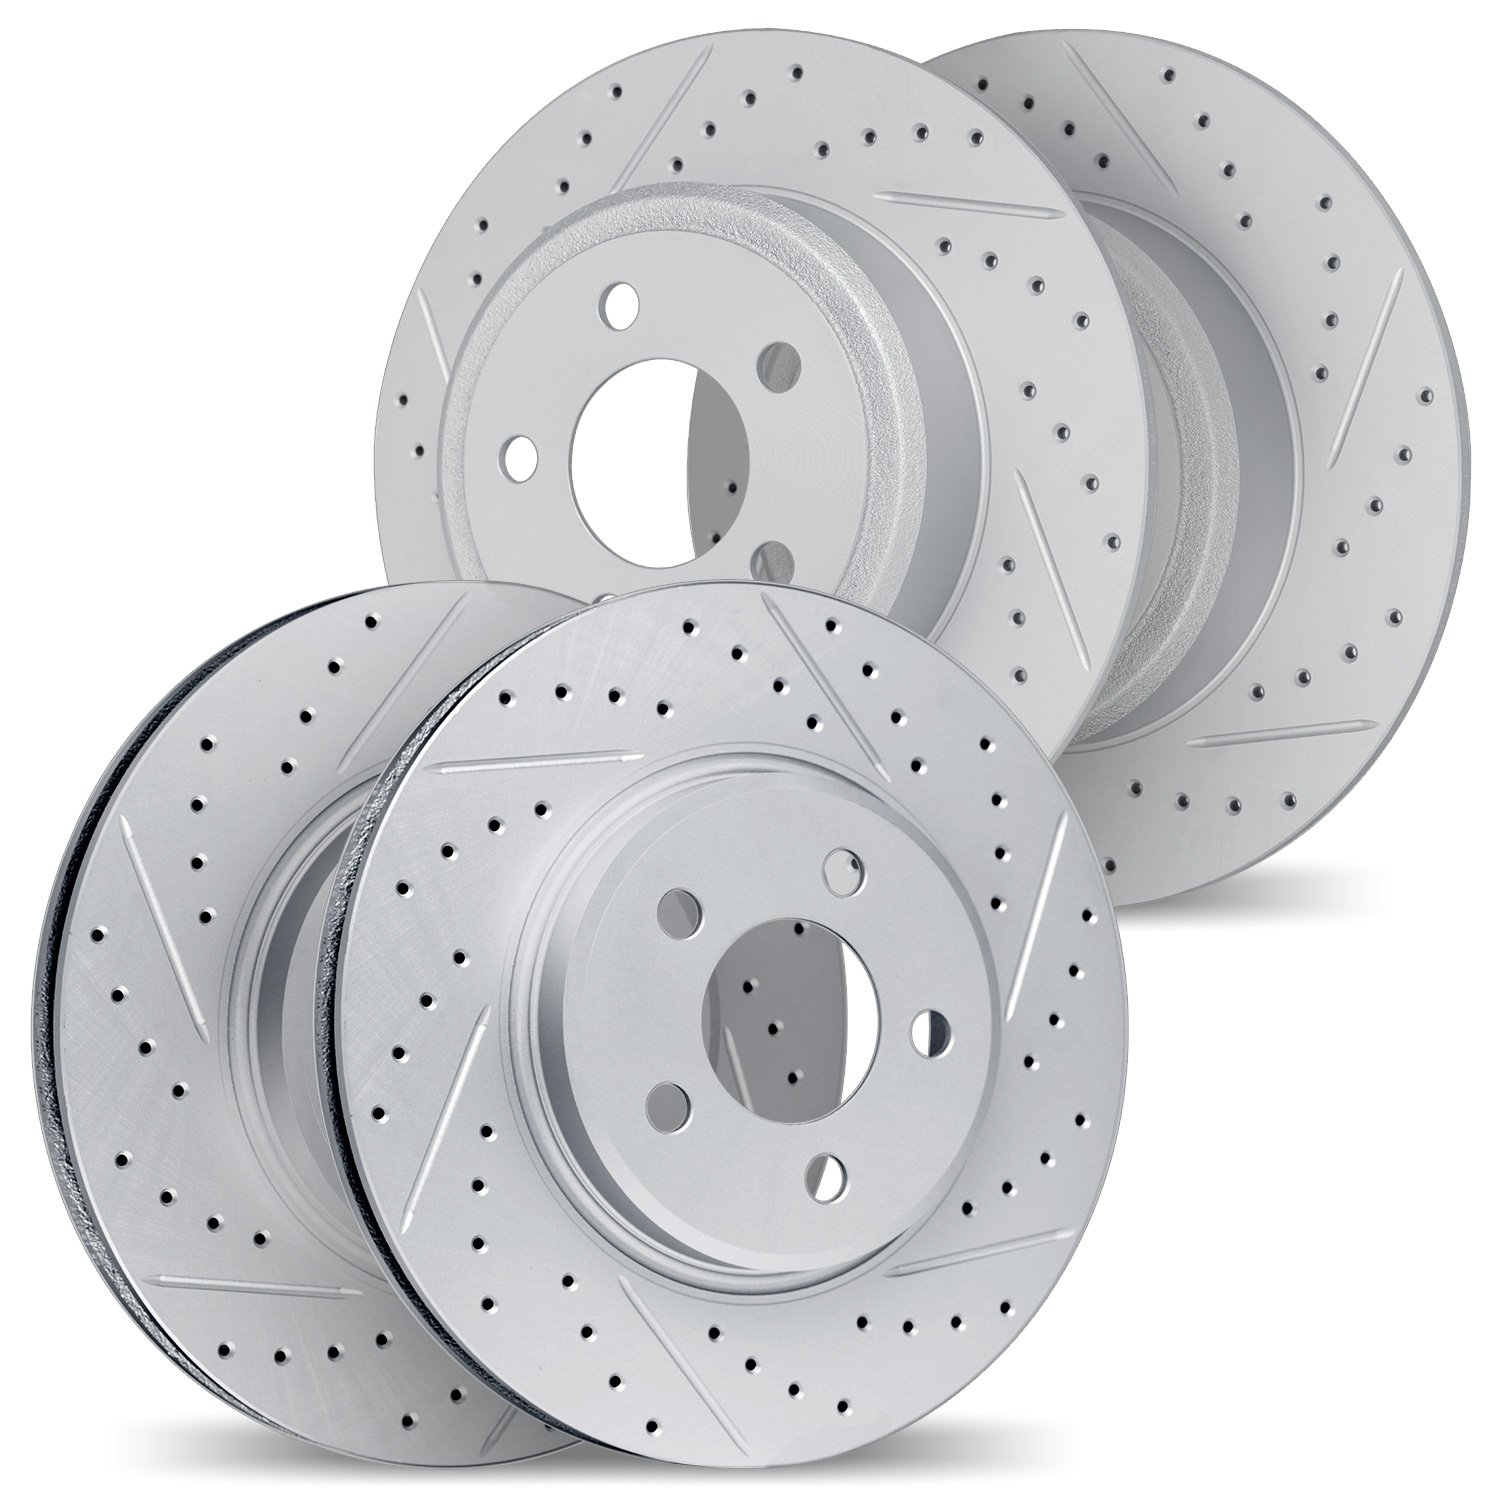 2004-03035 Geoperformance Drilled/Slotted Brake Rotors, Fits Select Kia/Hyundai/Genesis, Position: Front and Rear